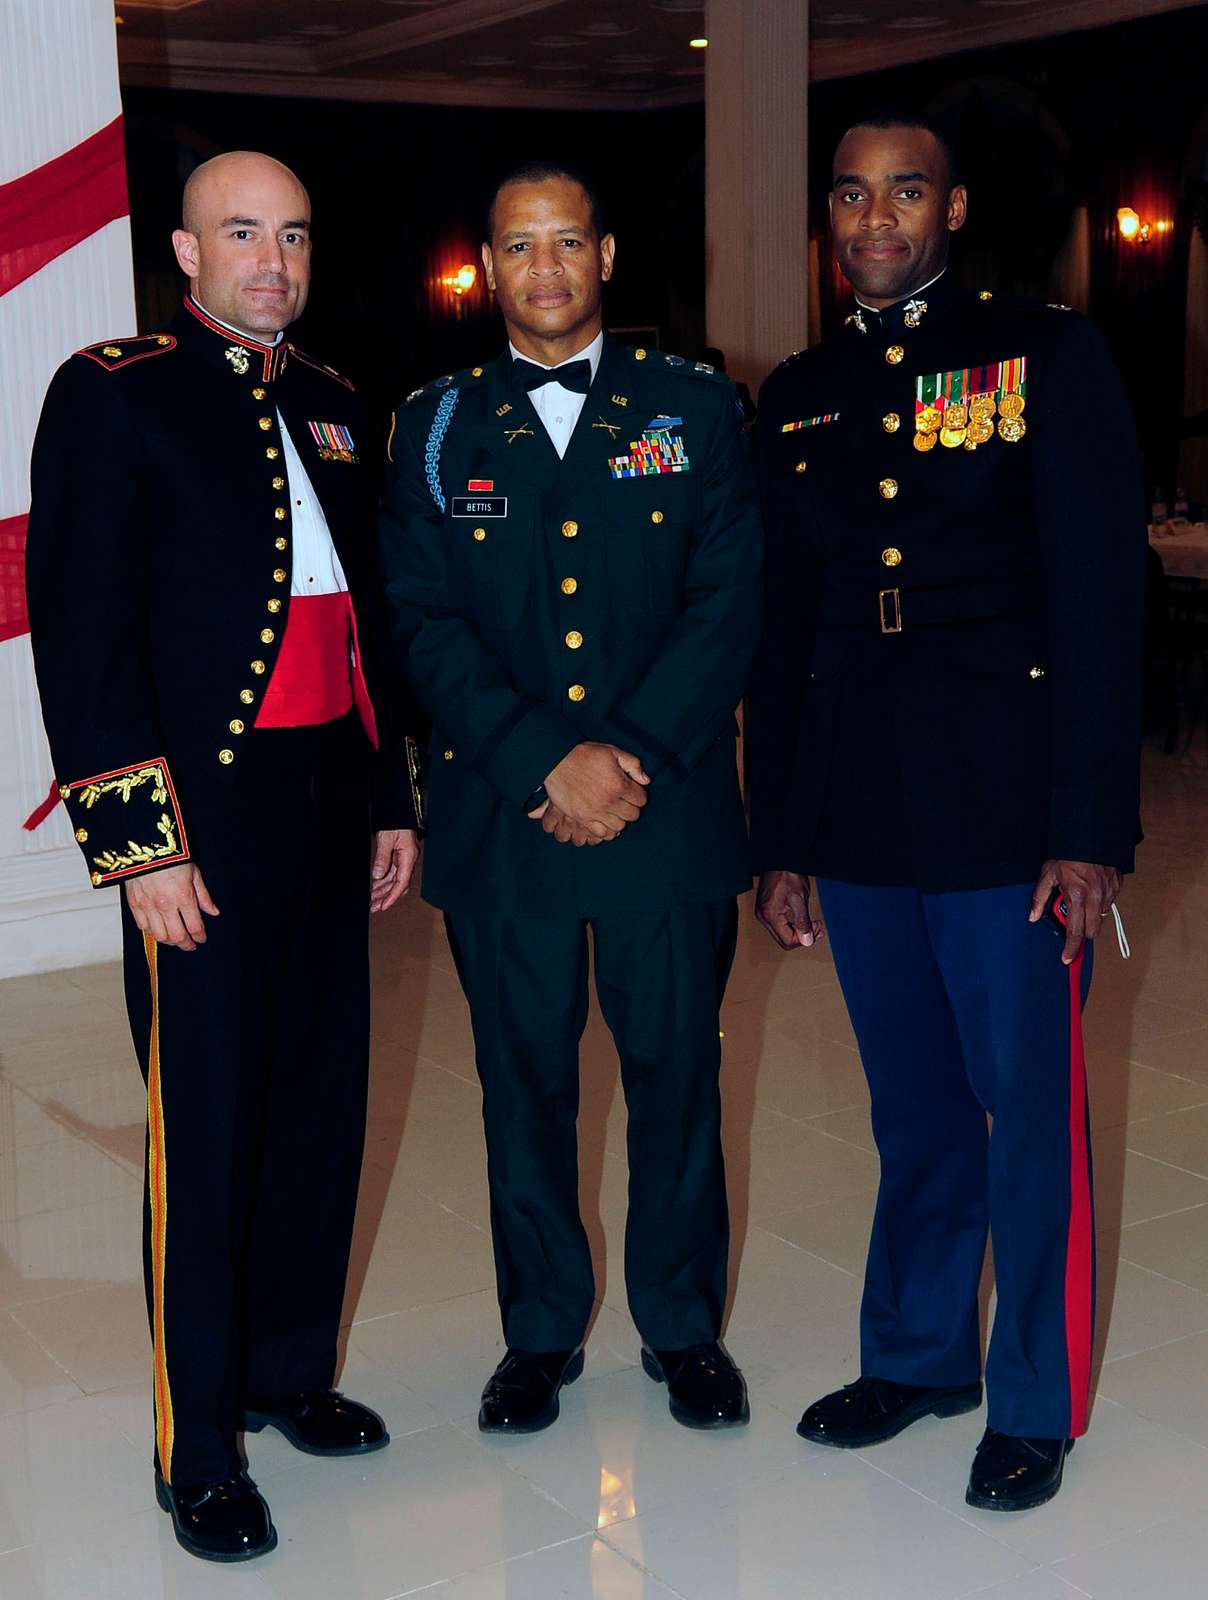 File:From left, U.S. Army Sgt. Bobi Limon and Spc. Joshua Dietrich